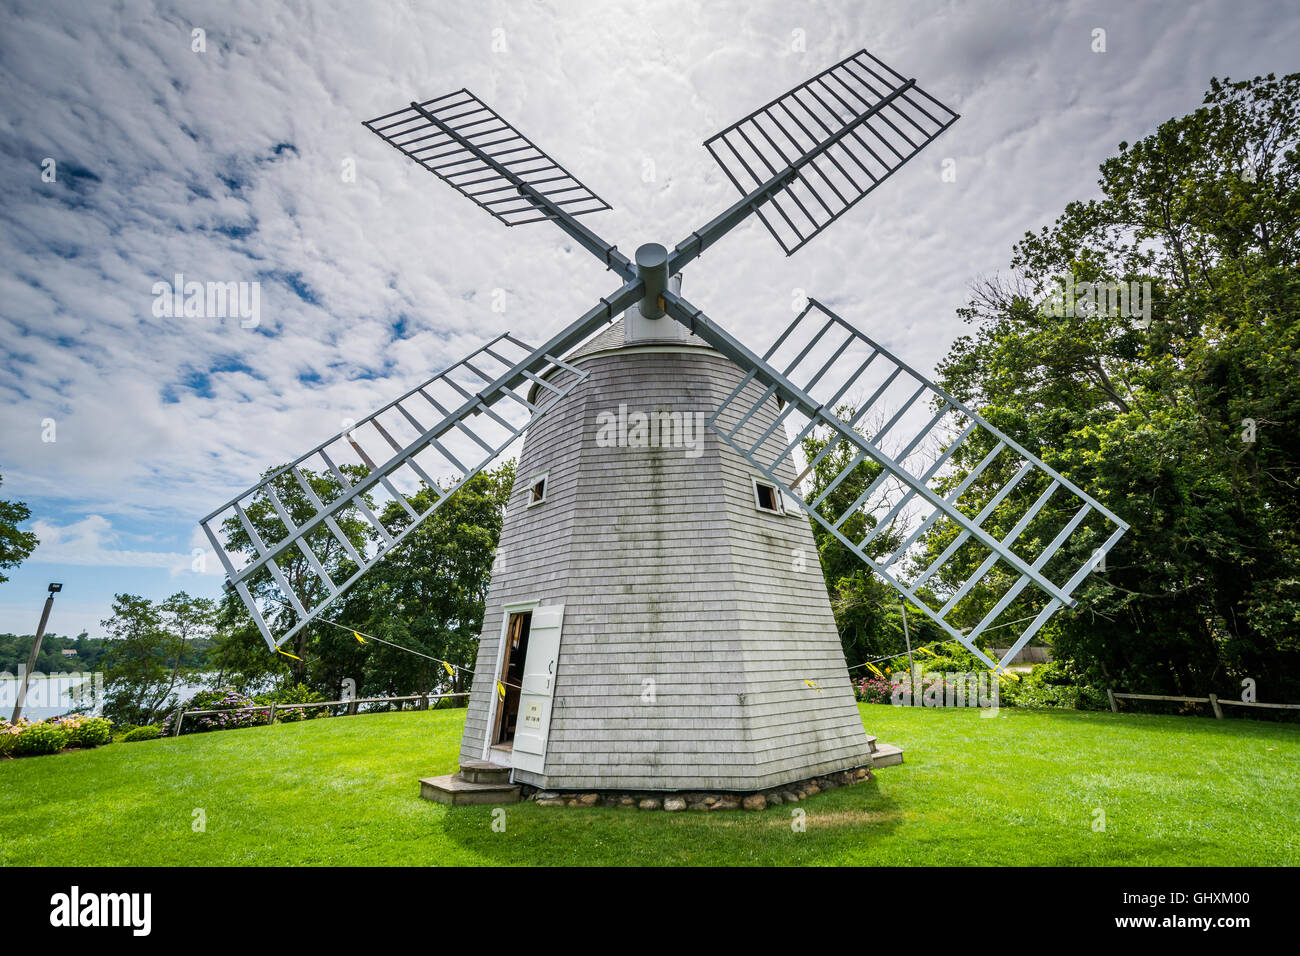 Jonathan Young Windmühle in Orleans, Cape Cod, Massachusetts. Stockfoto